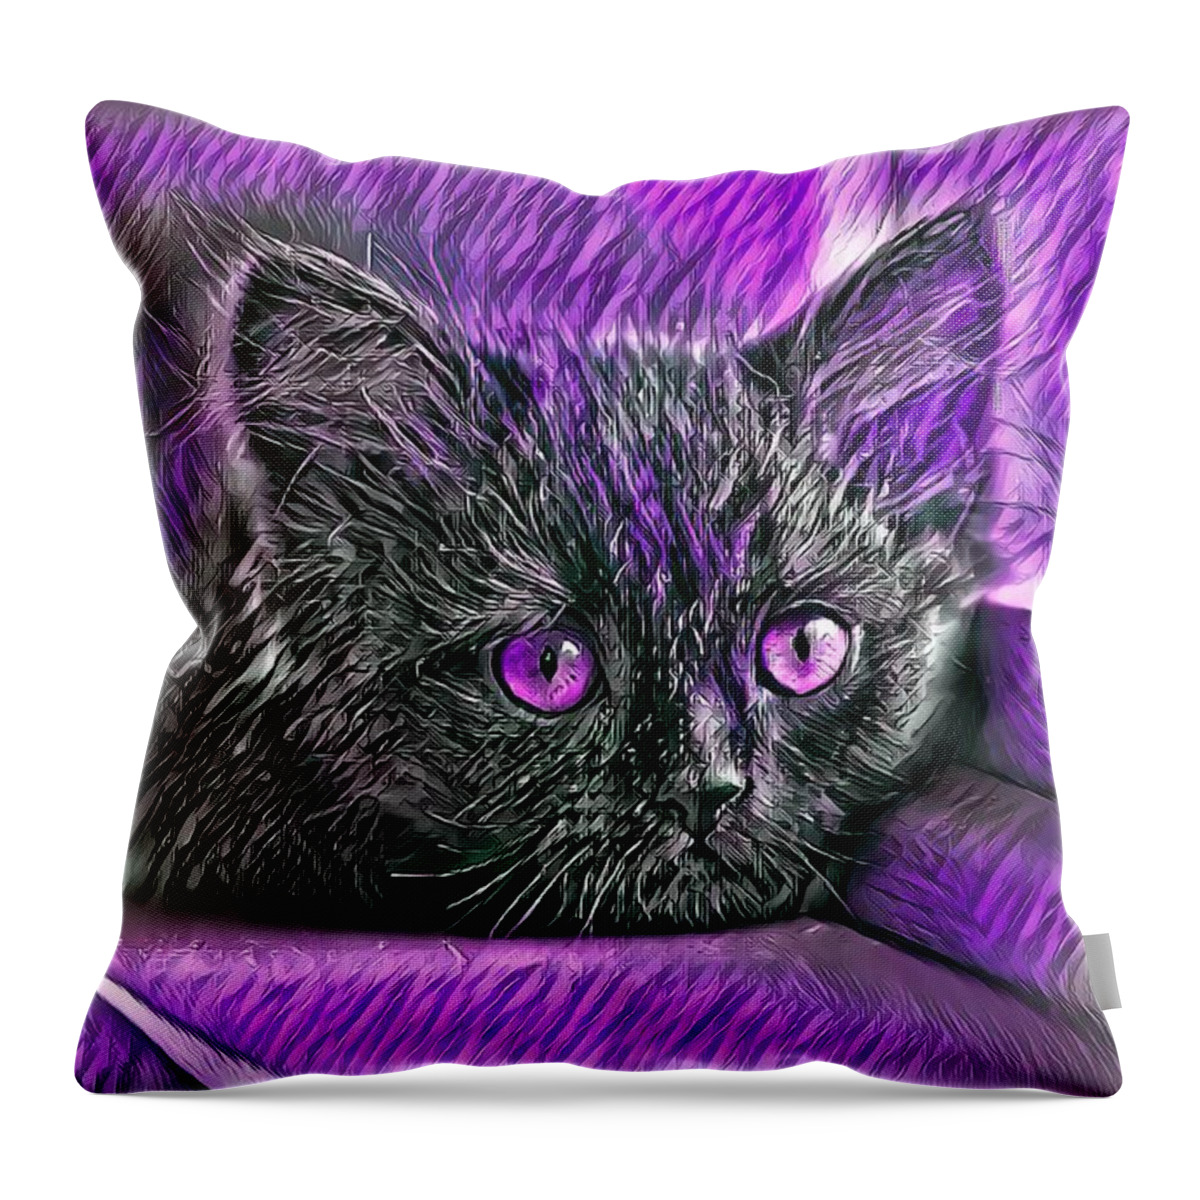 Purple Throw Pillow featuring the digital art Super Cool Black Cat Purple Eyes by Don Northup